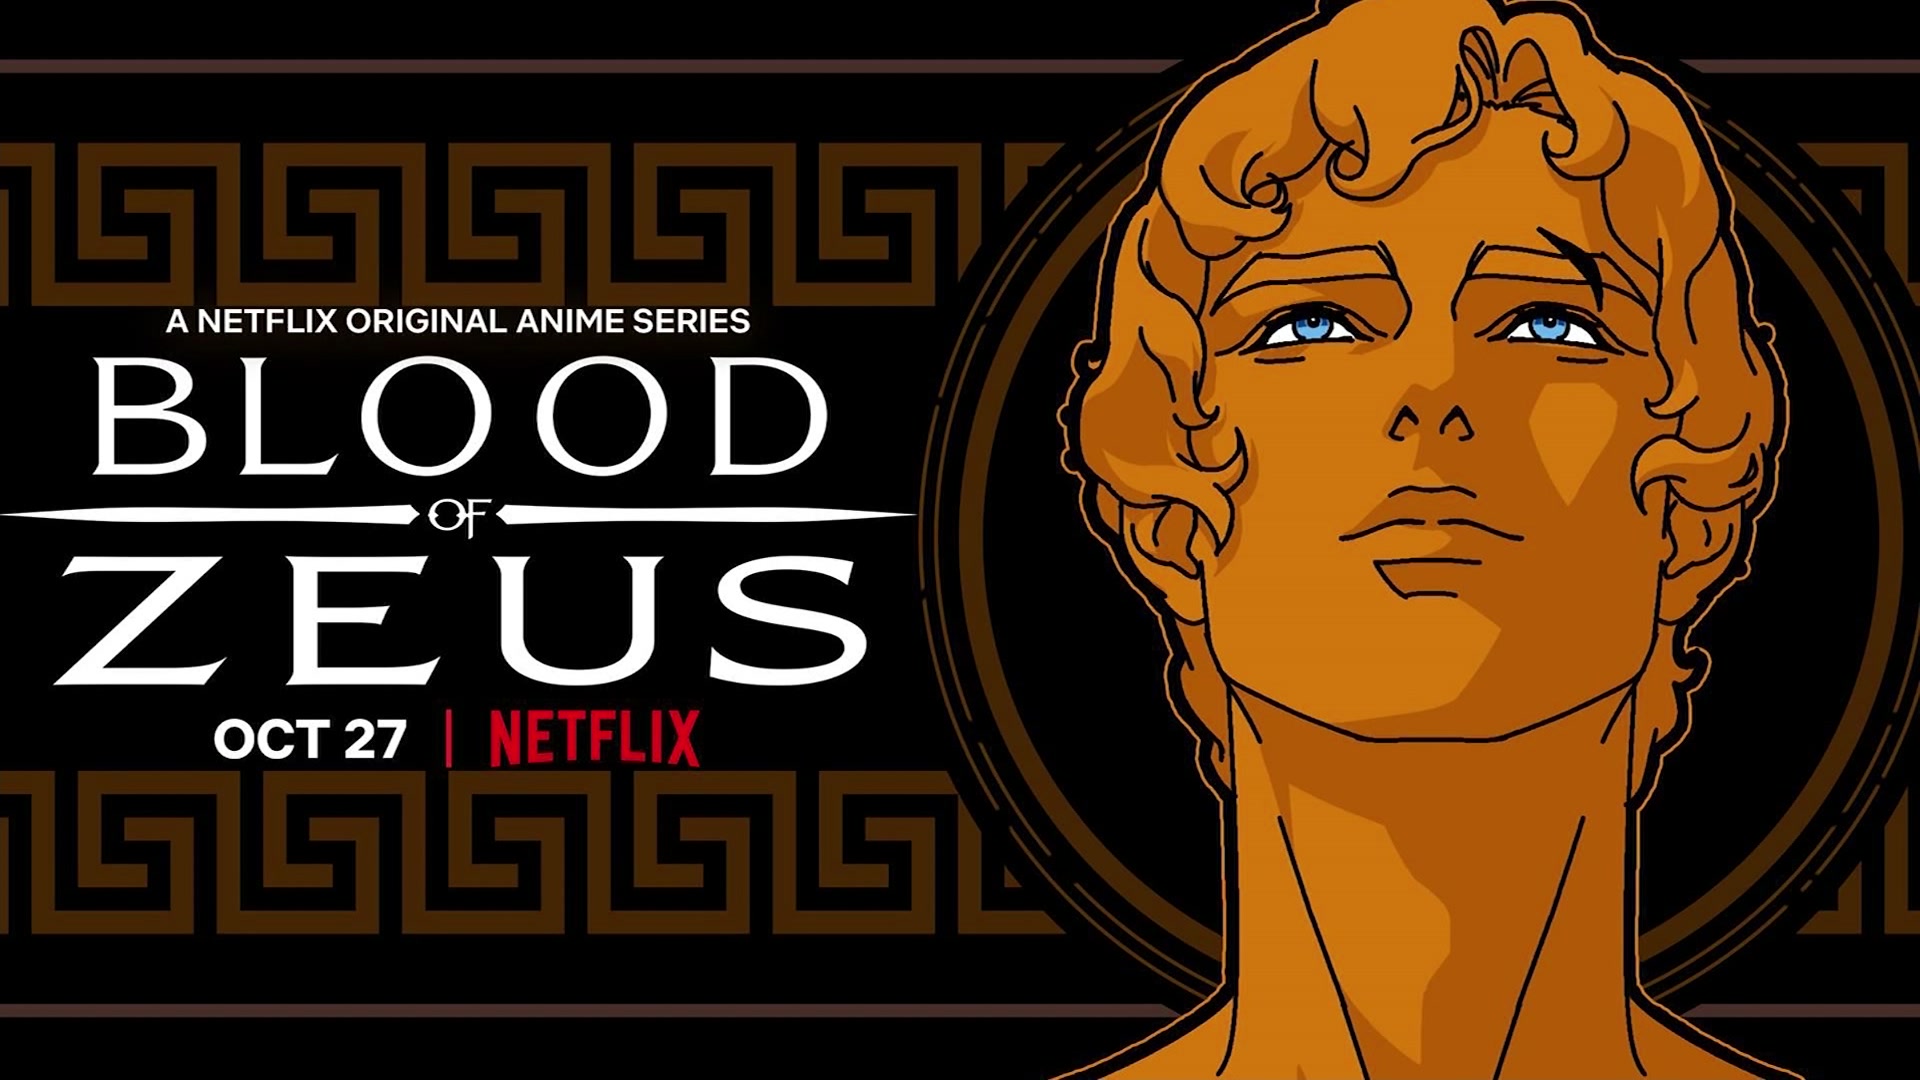 Blood of Zeus Season 2 Release Window, Cast, Plot, and More | The Mary Sue